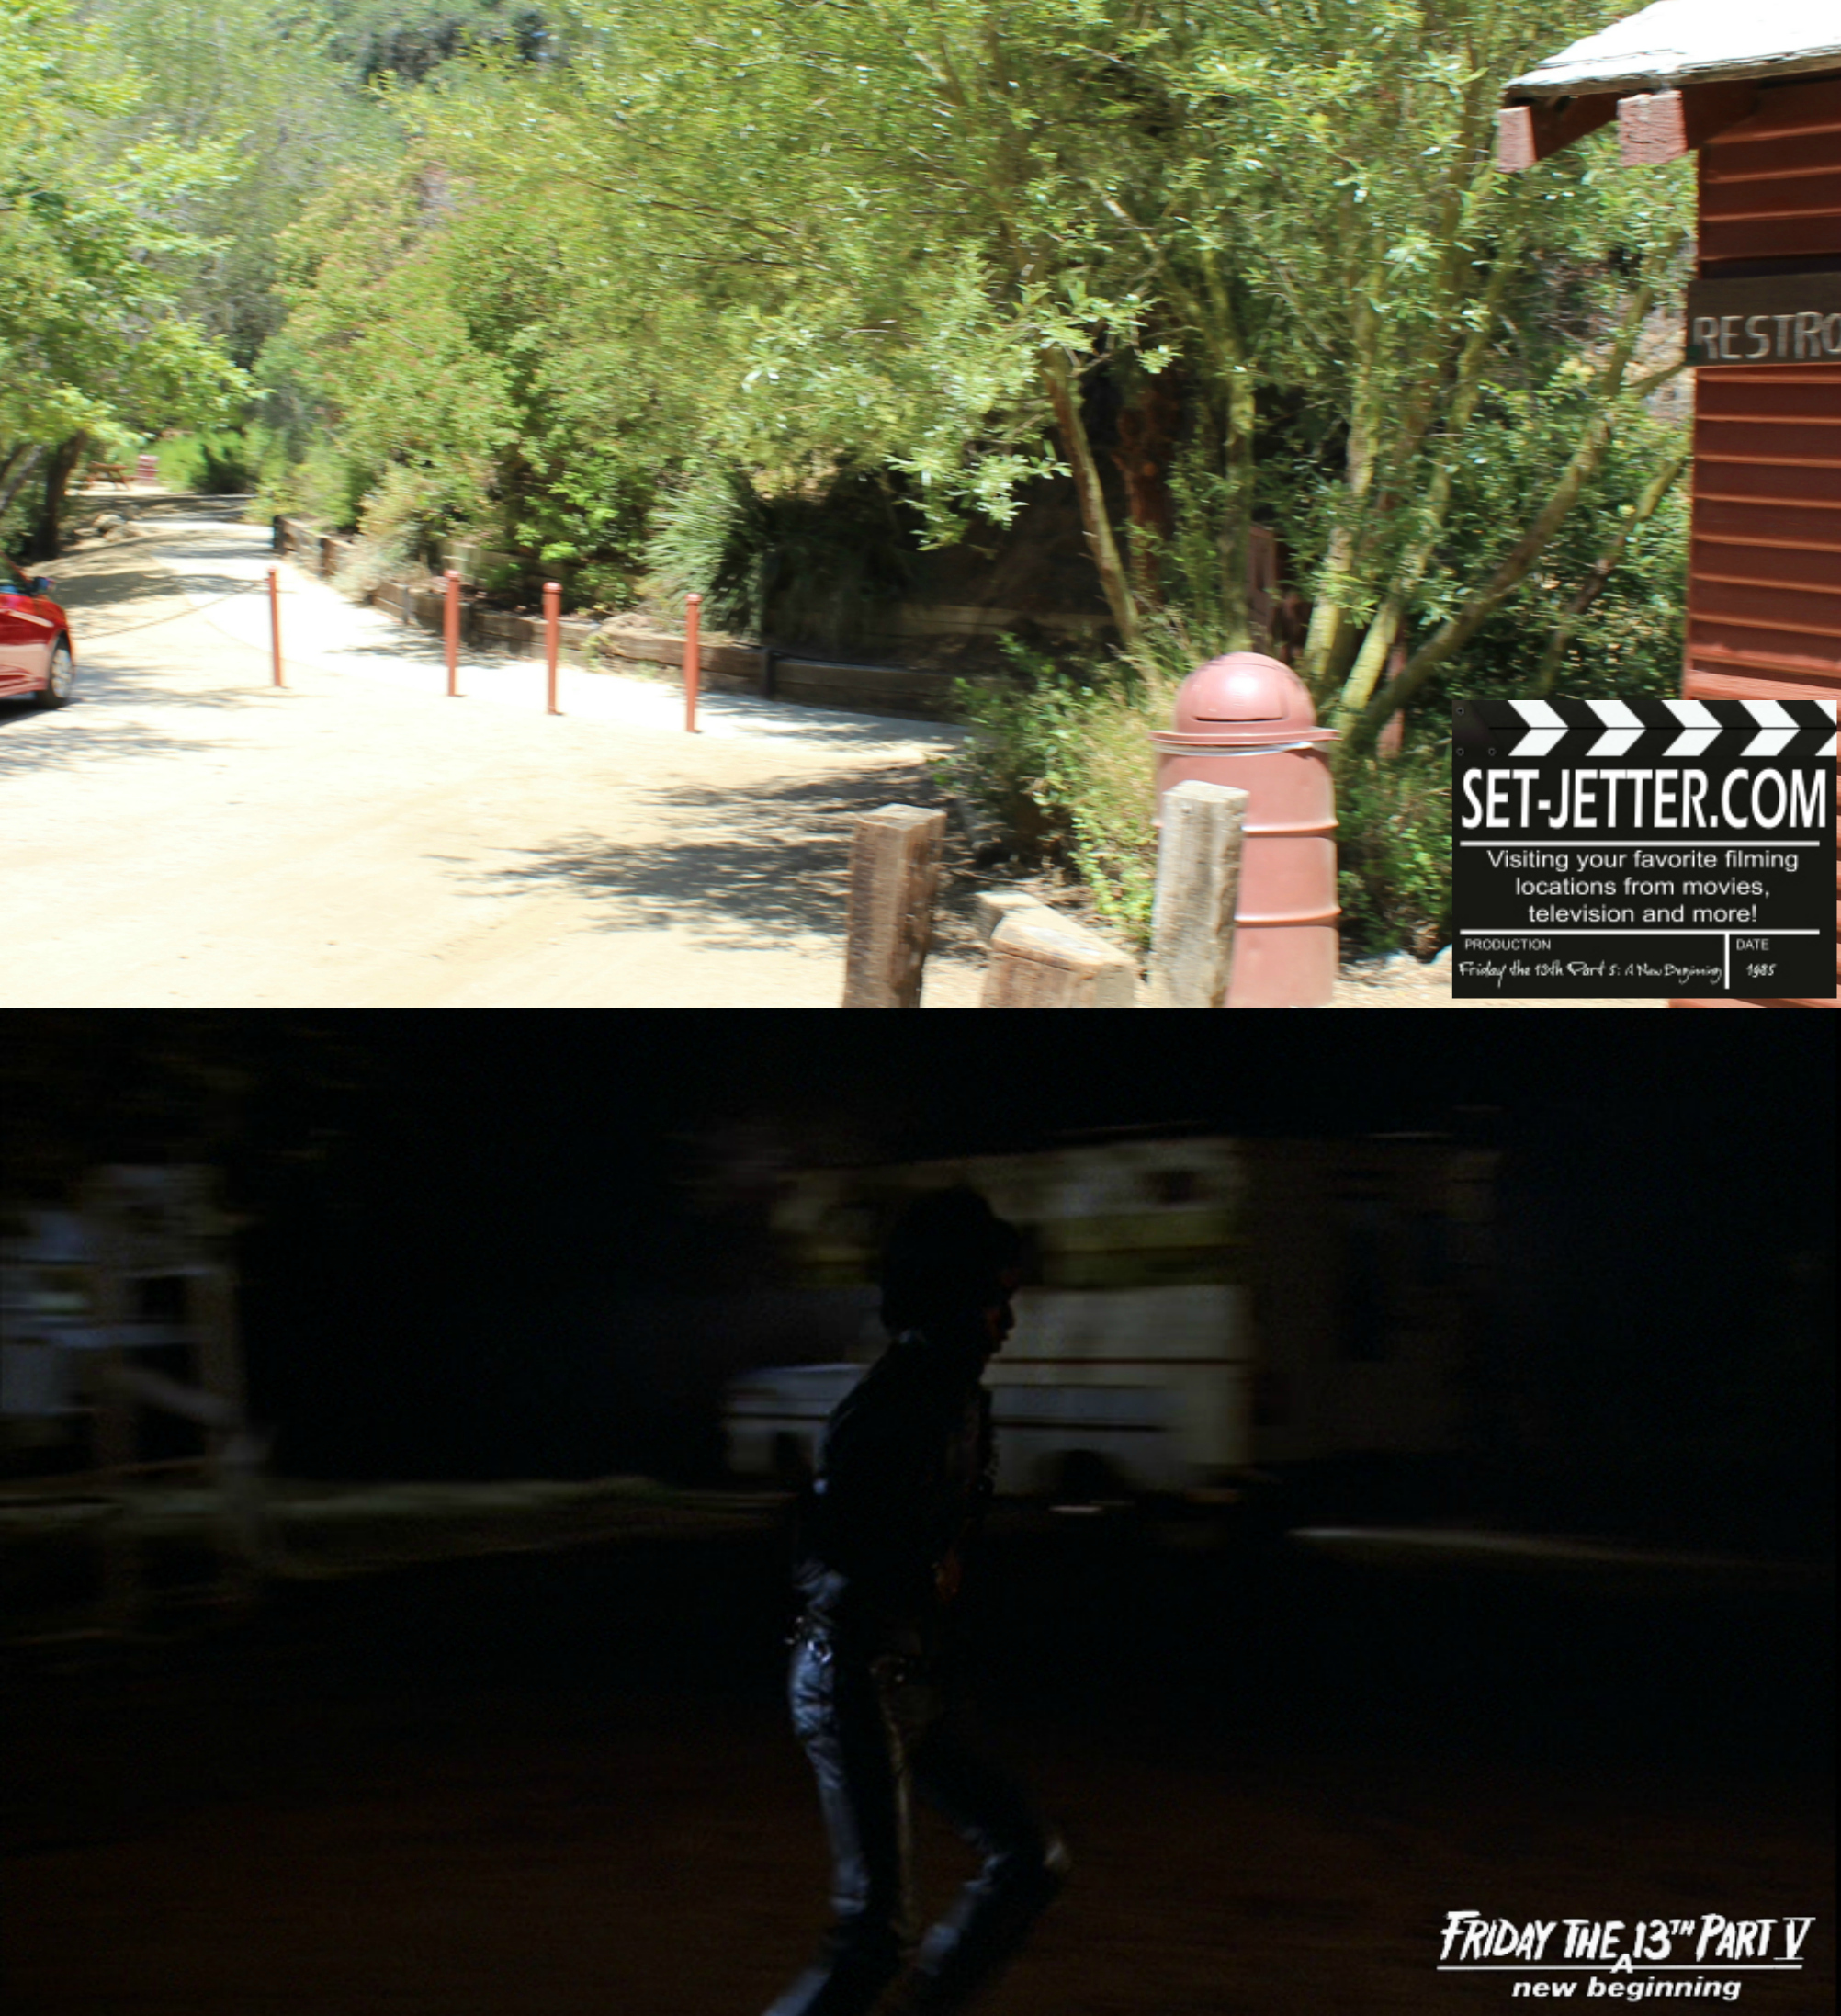 Friday the 13th Part V comparison 47.jpg